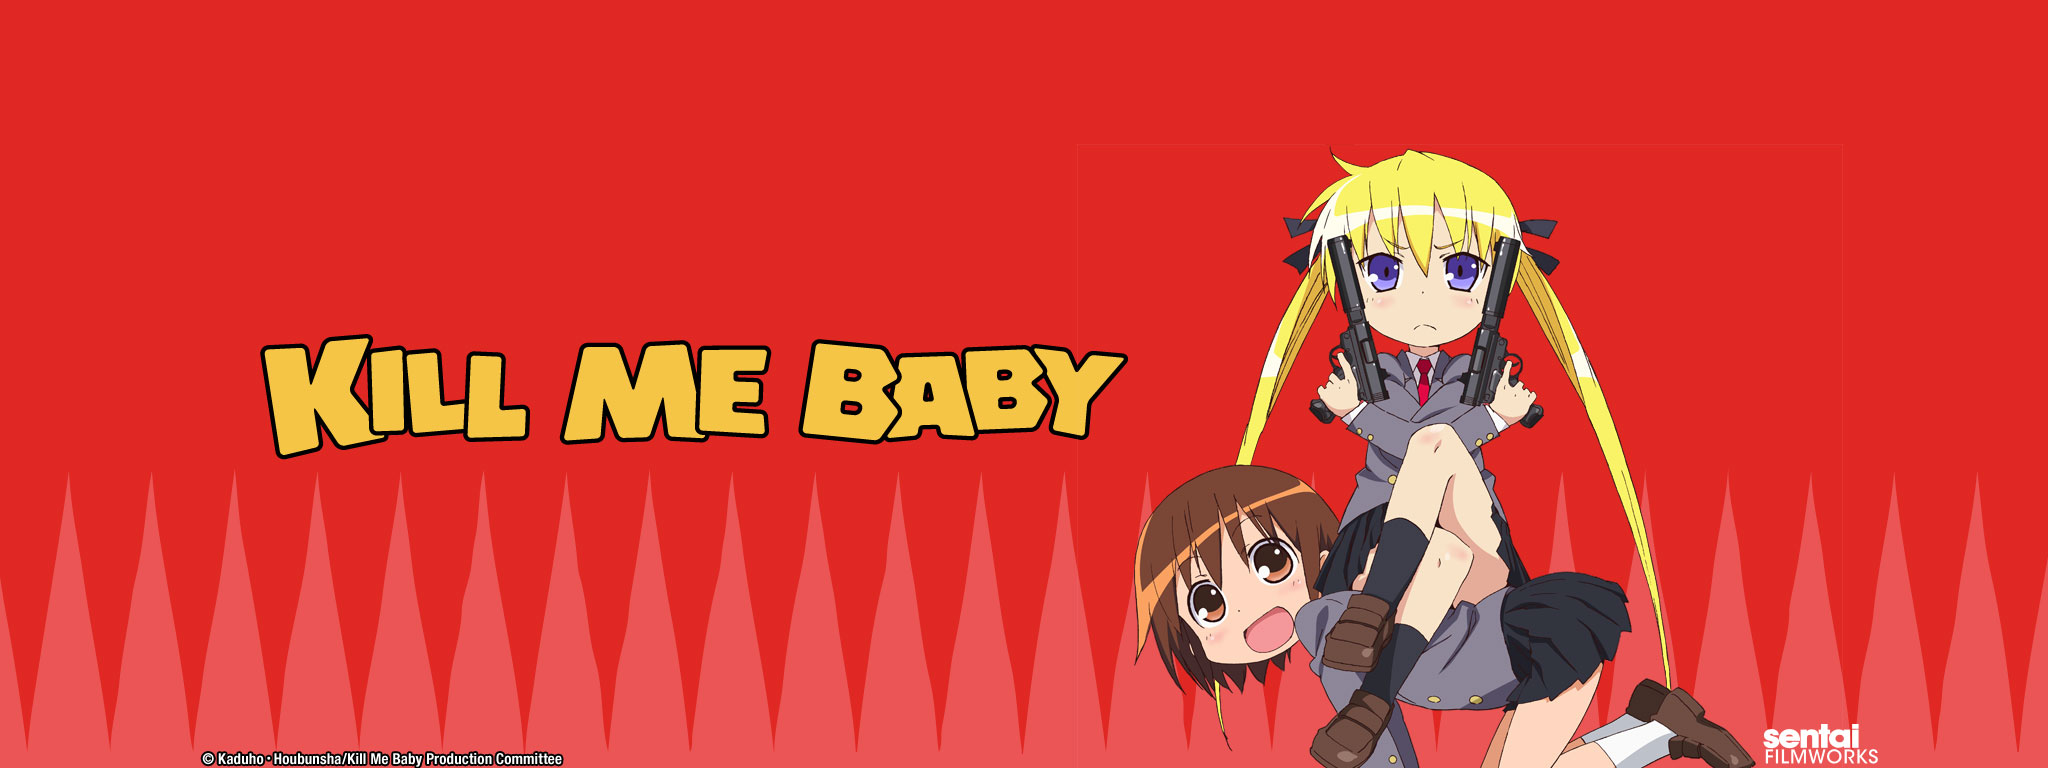 Title Art for Kill Me Baby